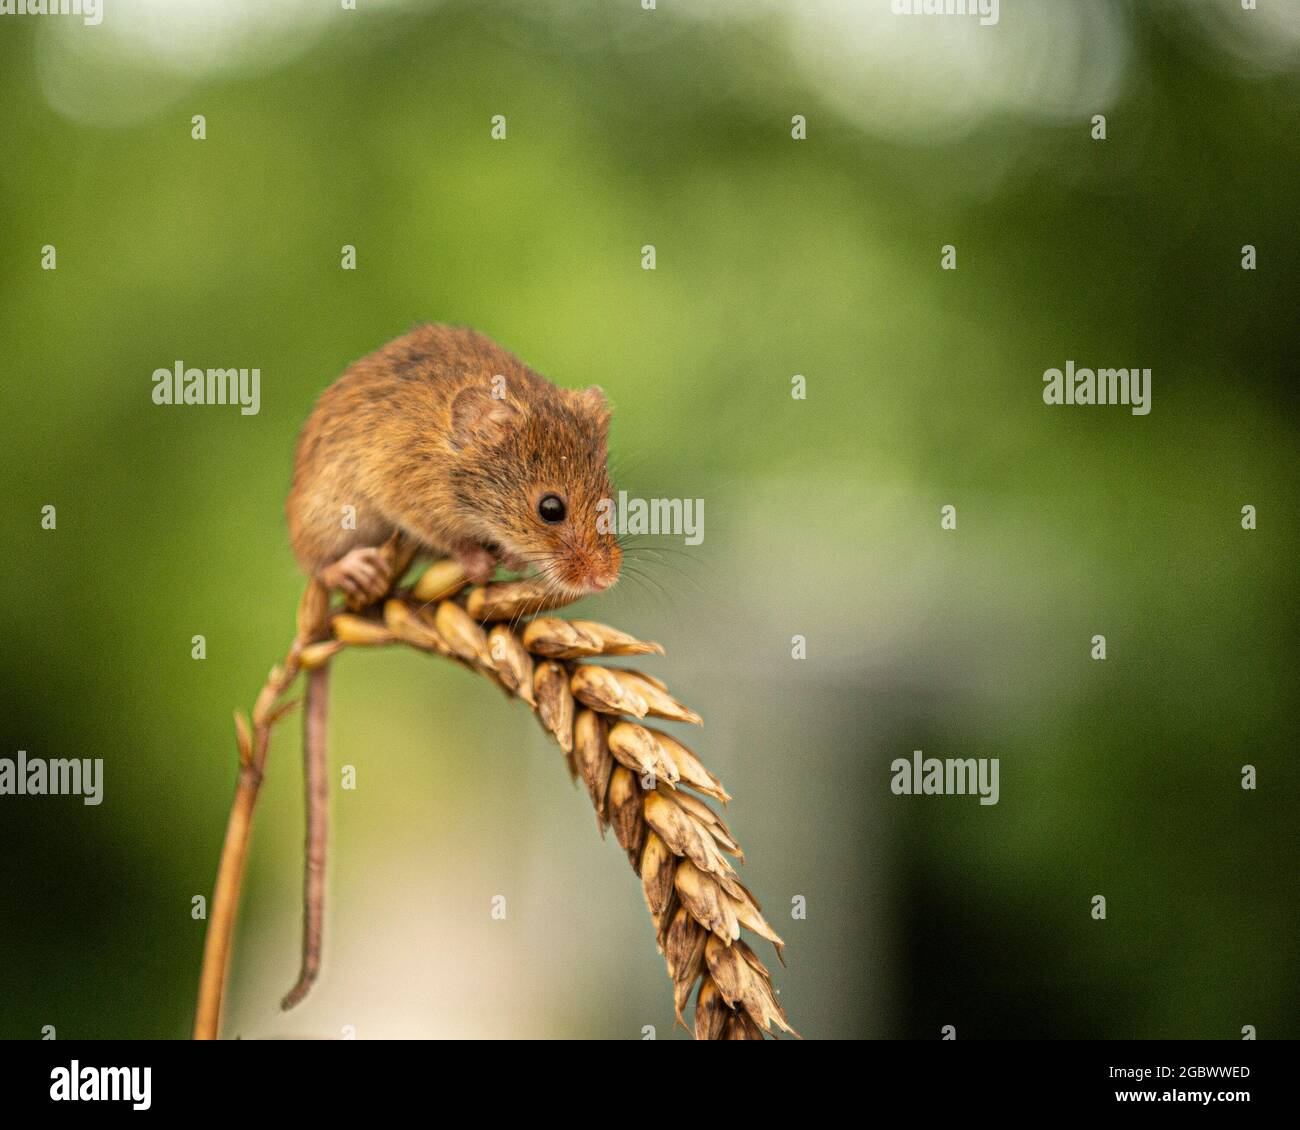 harvest mouse, Micromys minutus sitting on ear of wheat Stock Photo